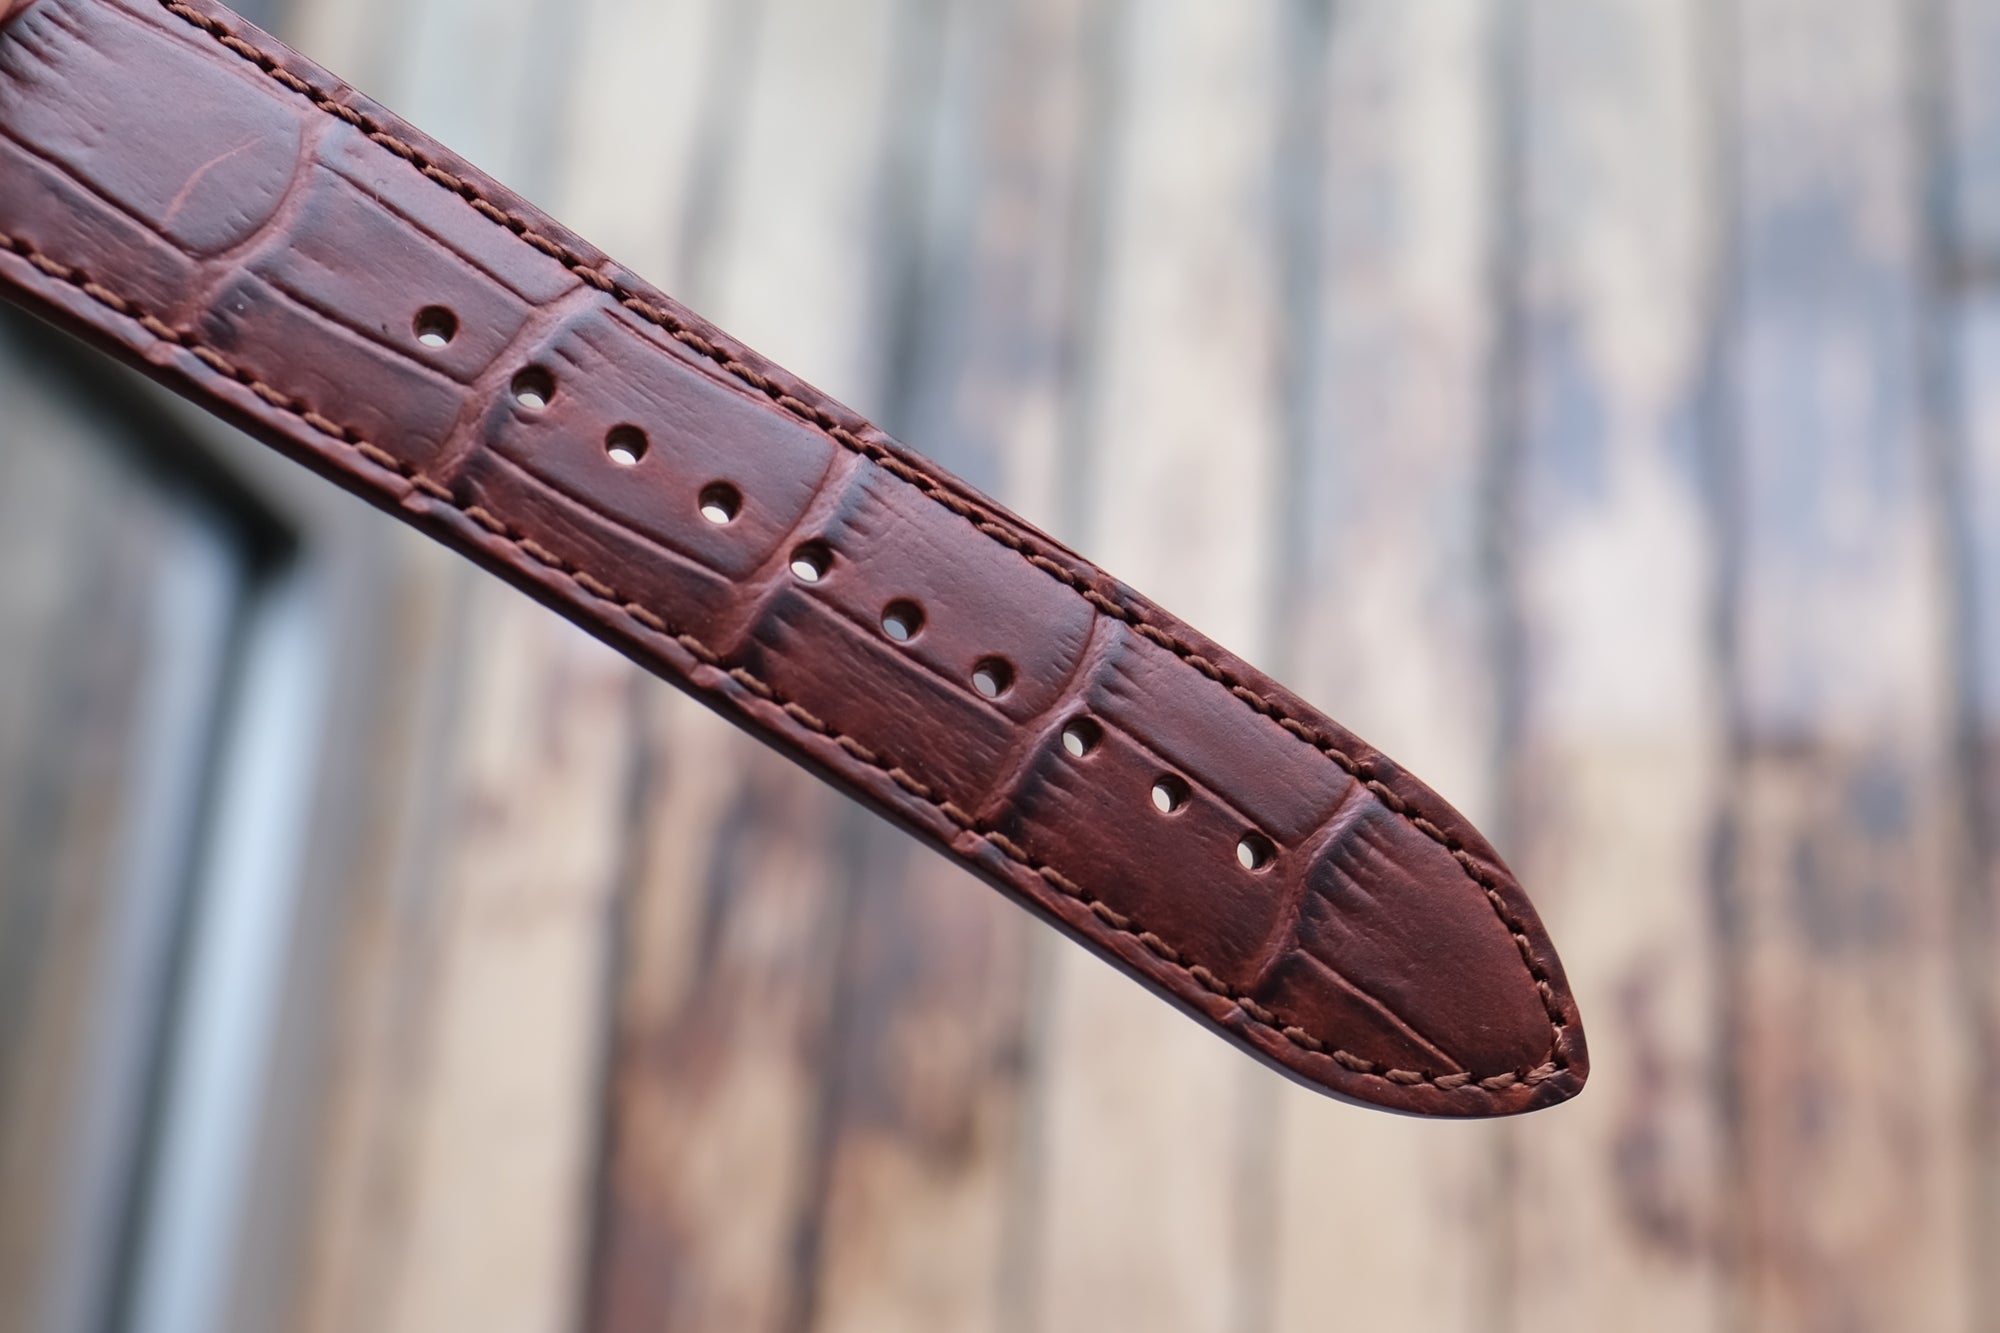 Pin and Buckle - Embossed Full-Grain Leather Apple Watch Bands - Aligator Collection - Full Grain Vegetable Tanned Leather - Mahogany